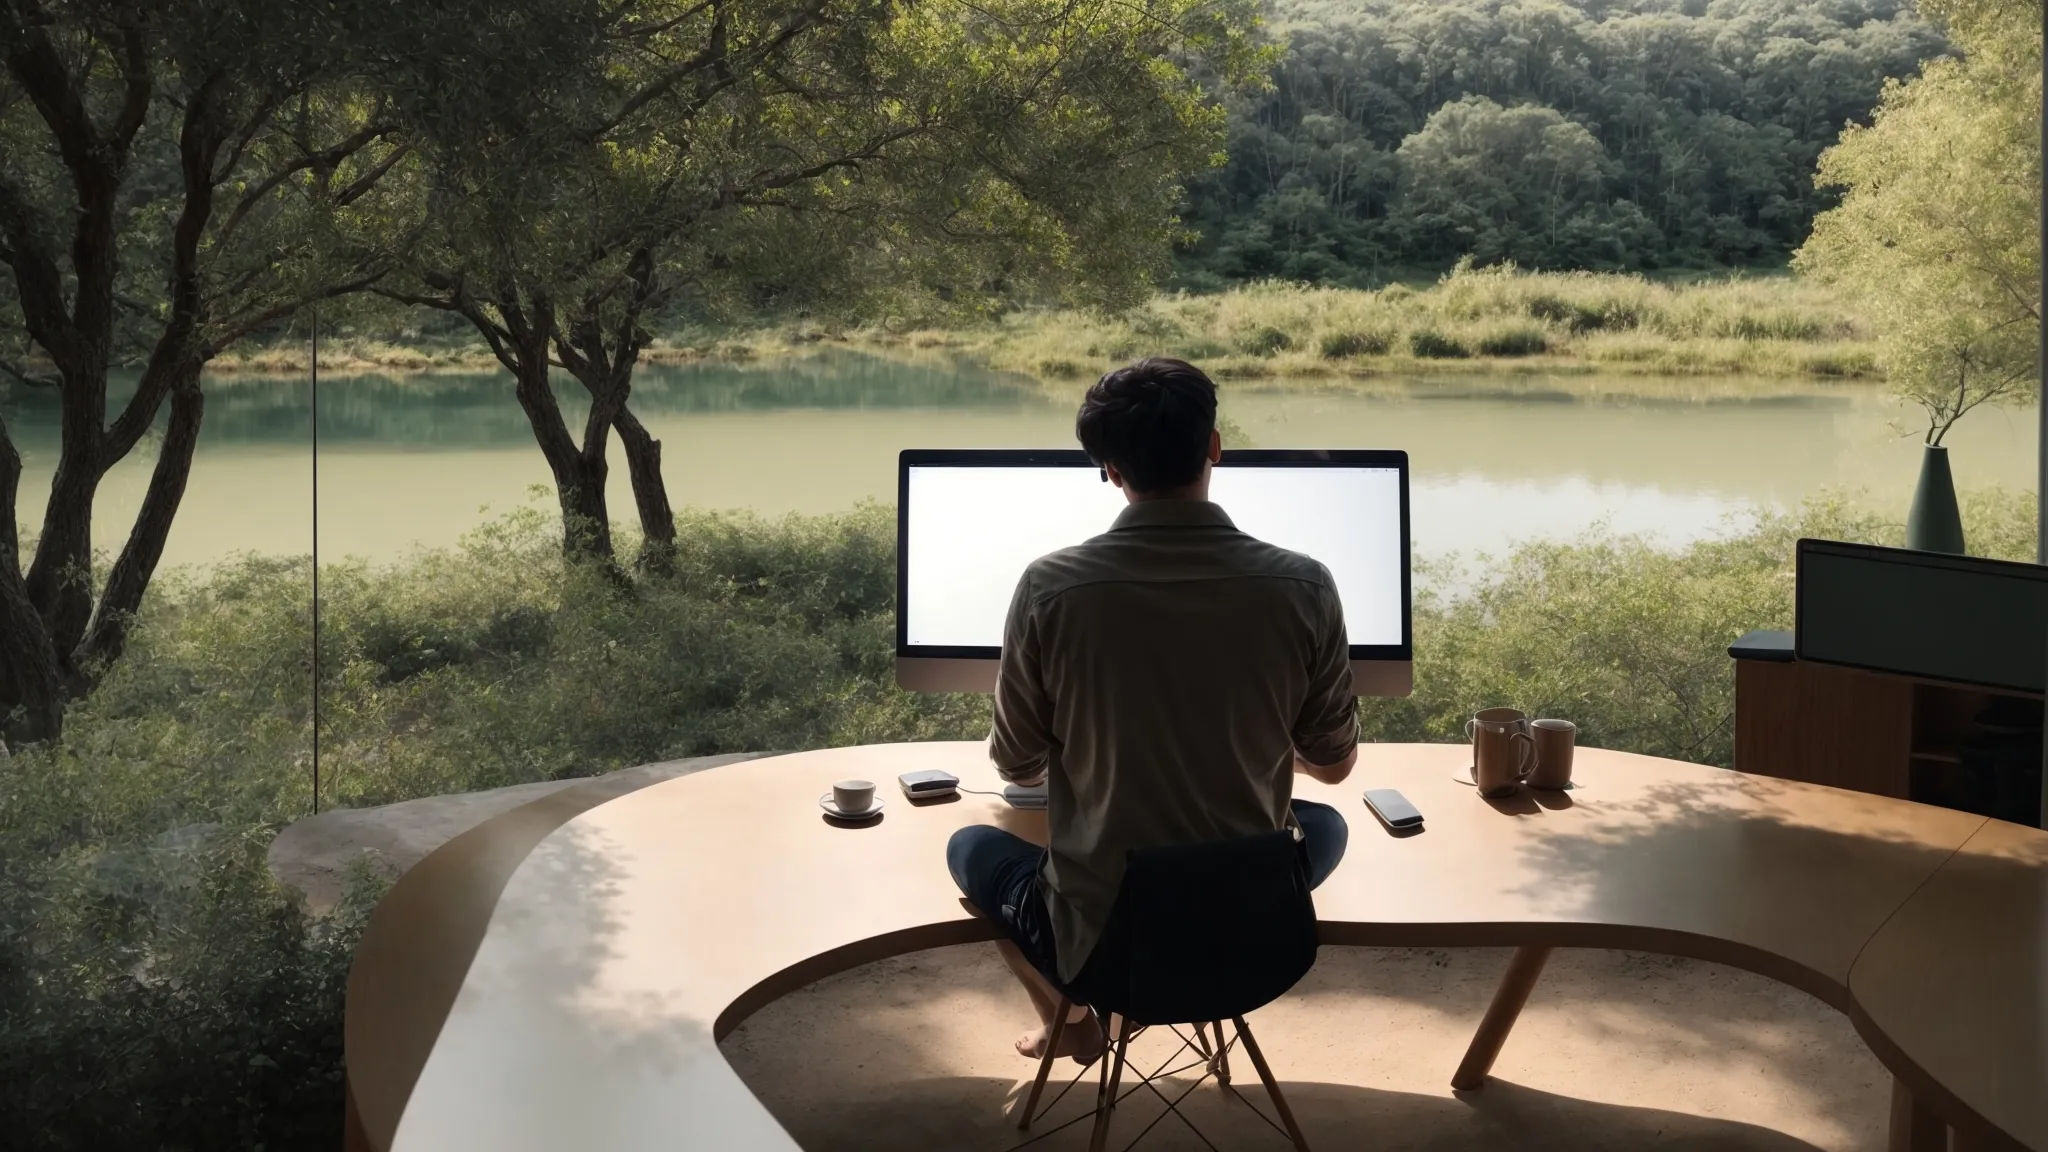 a person sits at a minimalist desk with a laptop open, gazing thoughtfully out of a window at a serene nature scene.